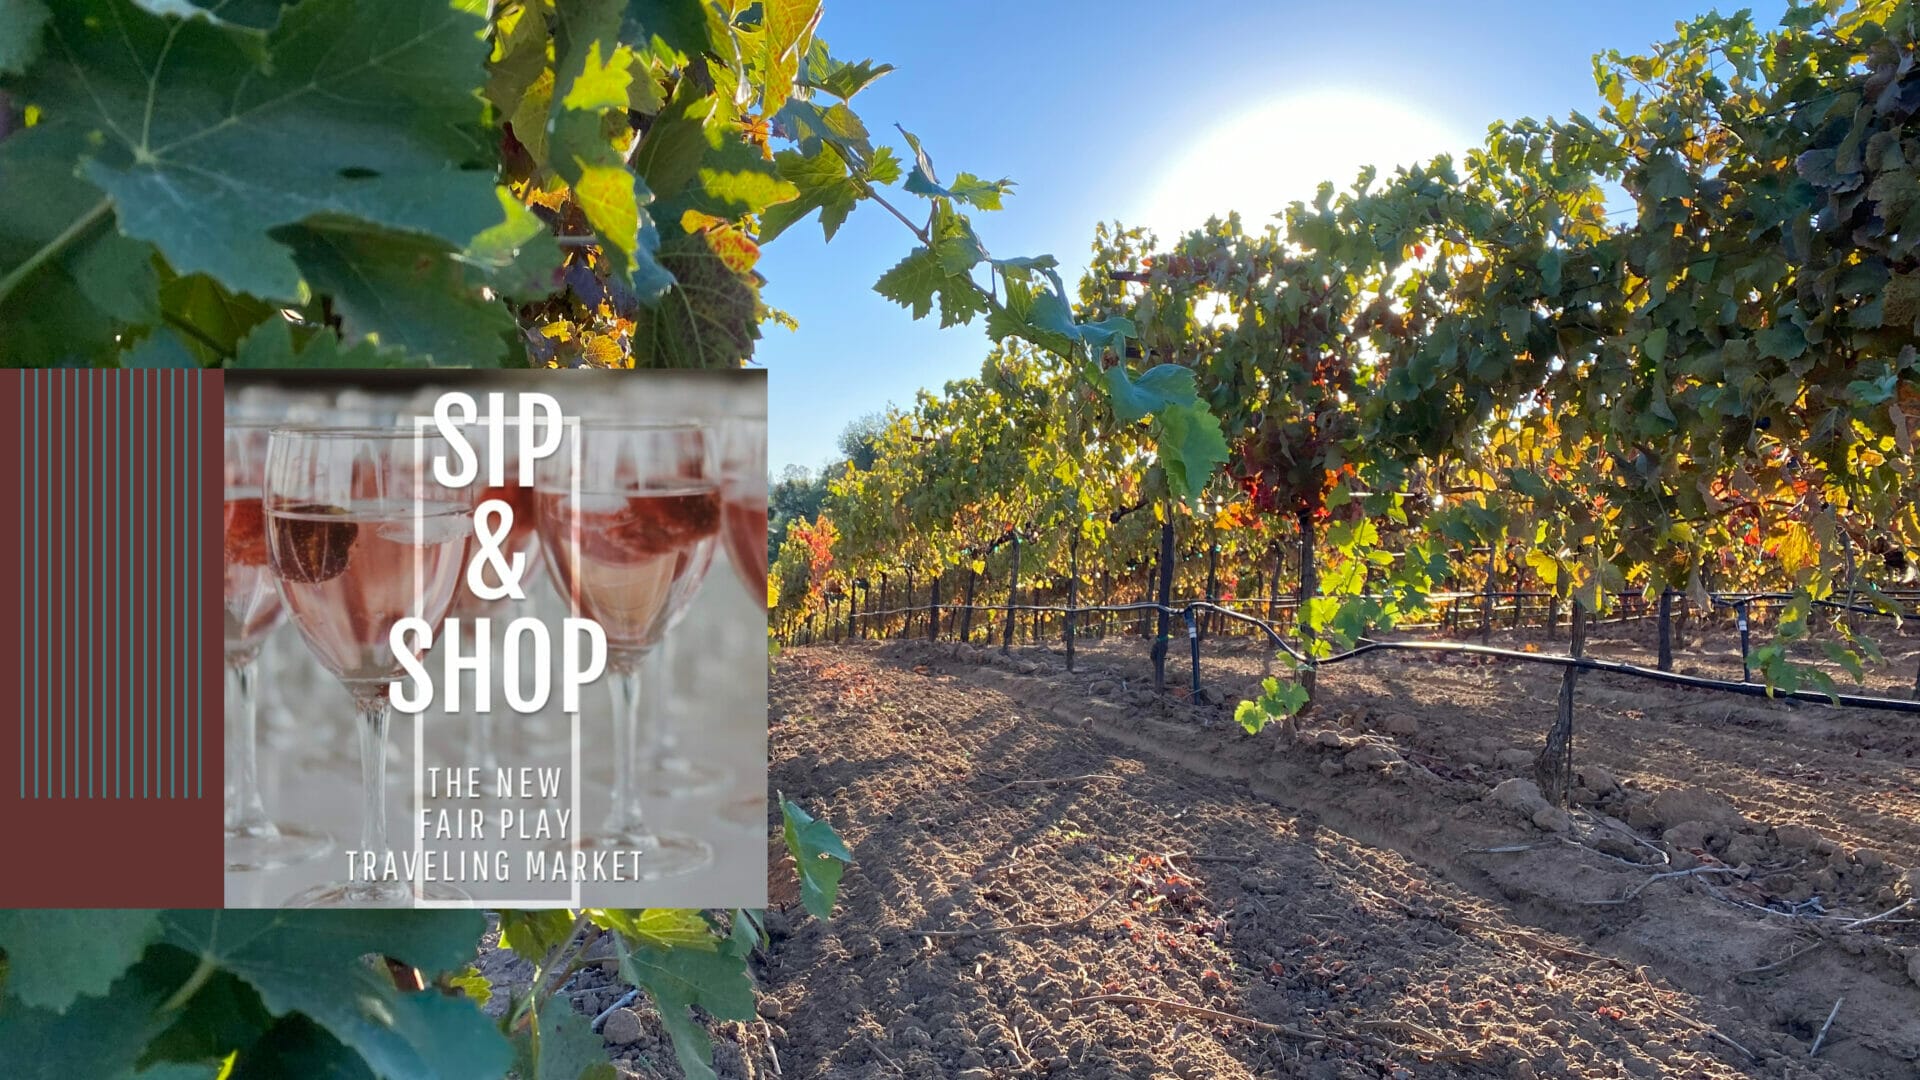 Sip and shop logo in a vineyard